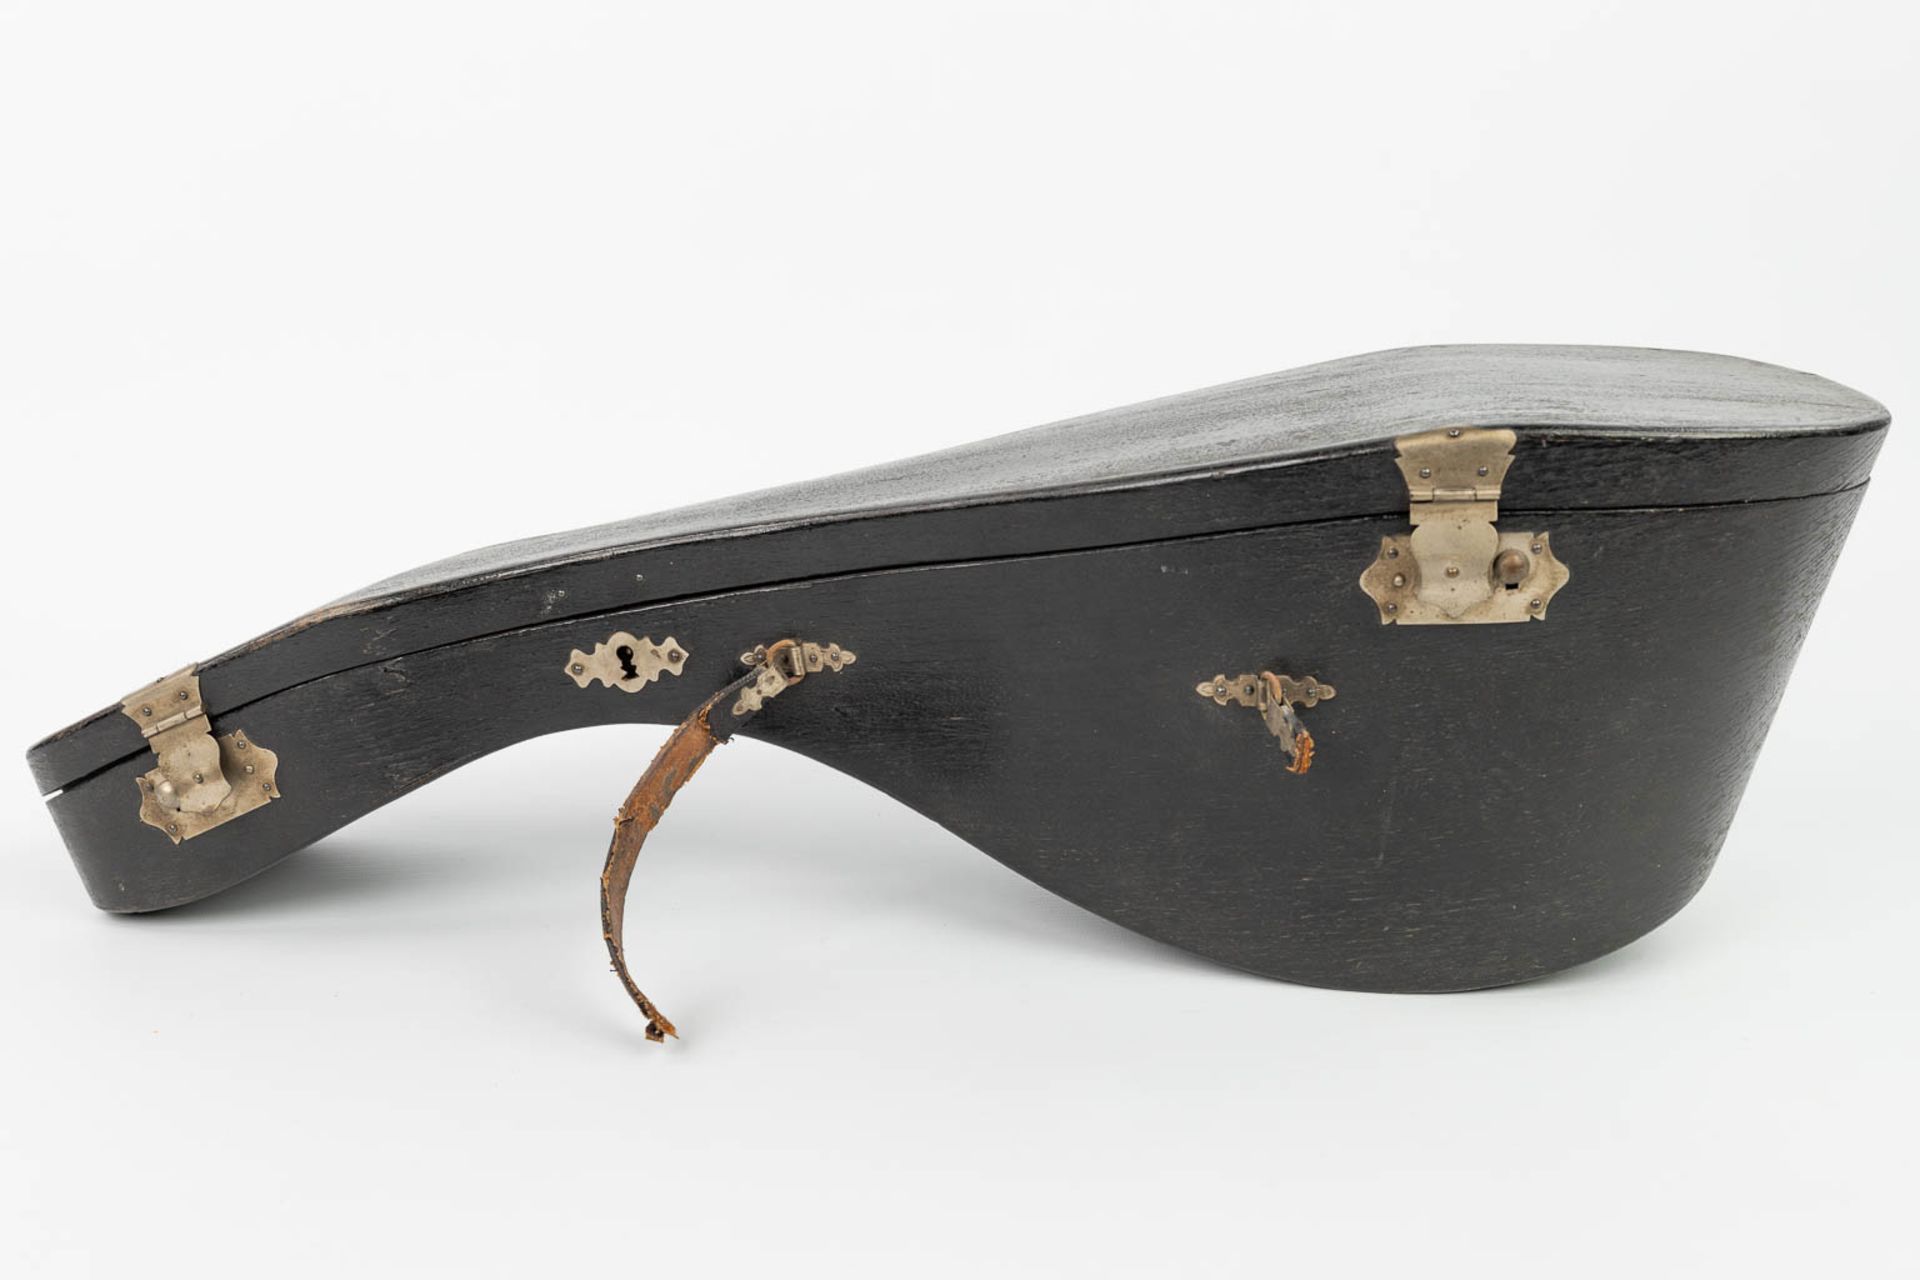 A collection of 3 musical instruments: 2 mandolines and a violin, after a model made by Stradivarius - Image 11 of 56